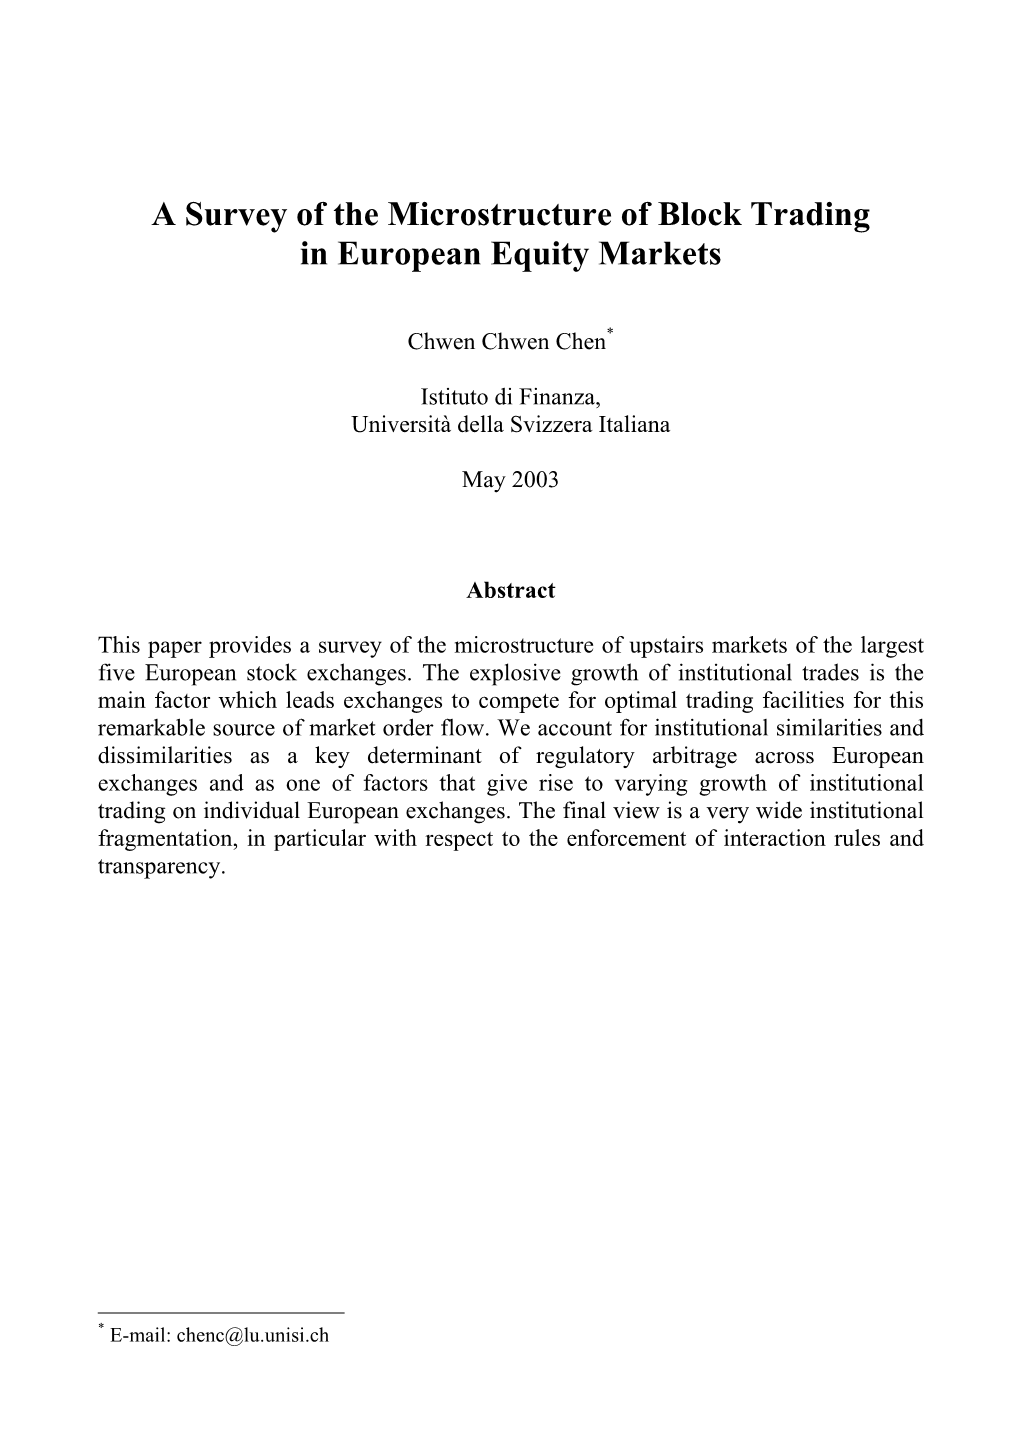 A Survey of the Microstructure of Block Trading in European Equity Markets